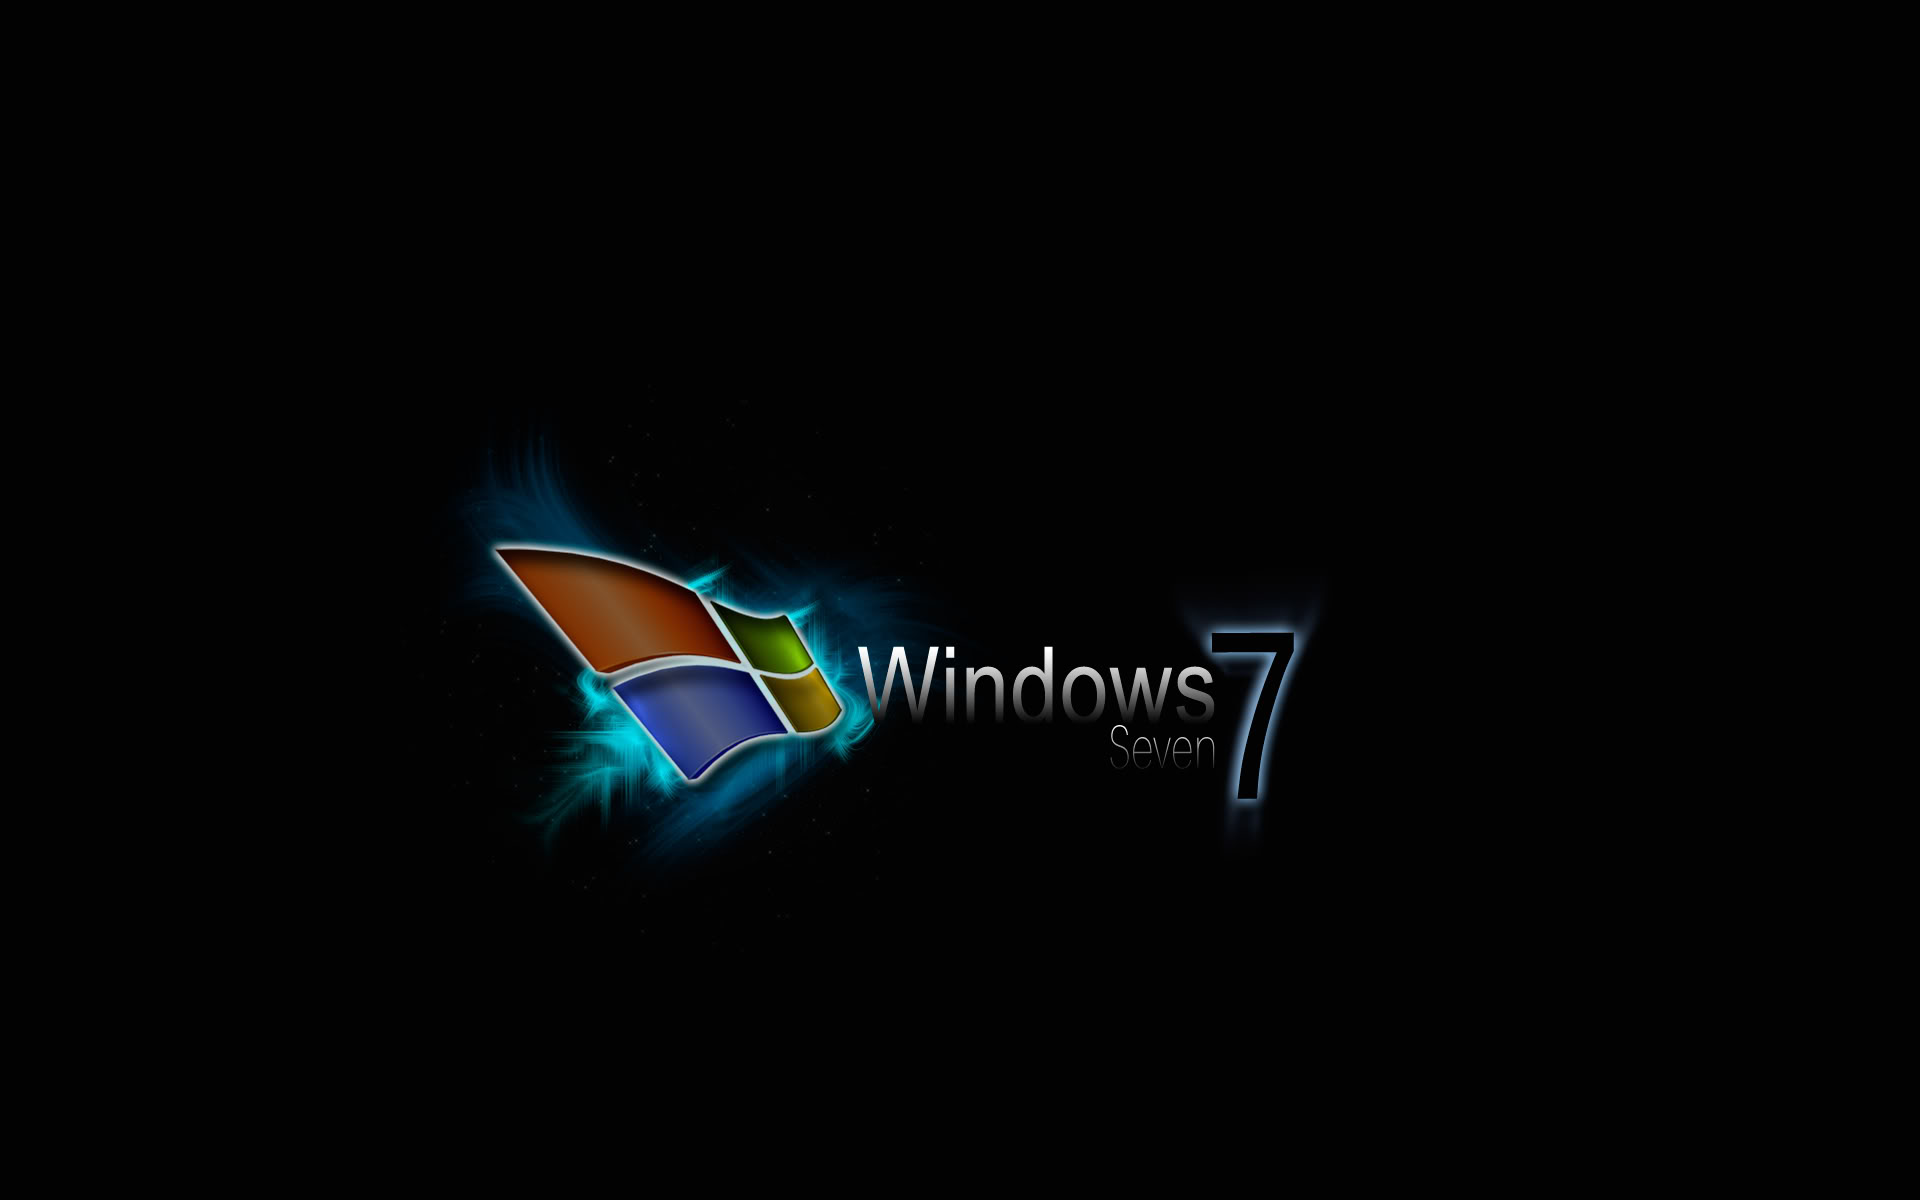 WINDOWS 7 COOL Wallpapers Free Download Collections 33 High resolution